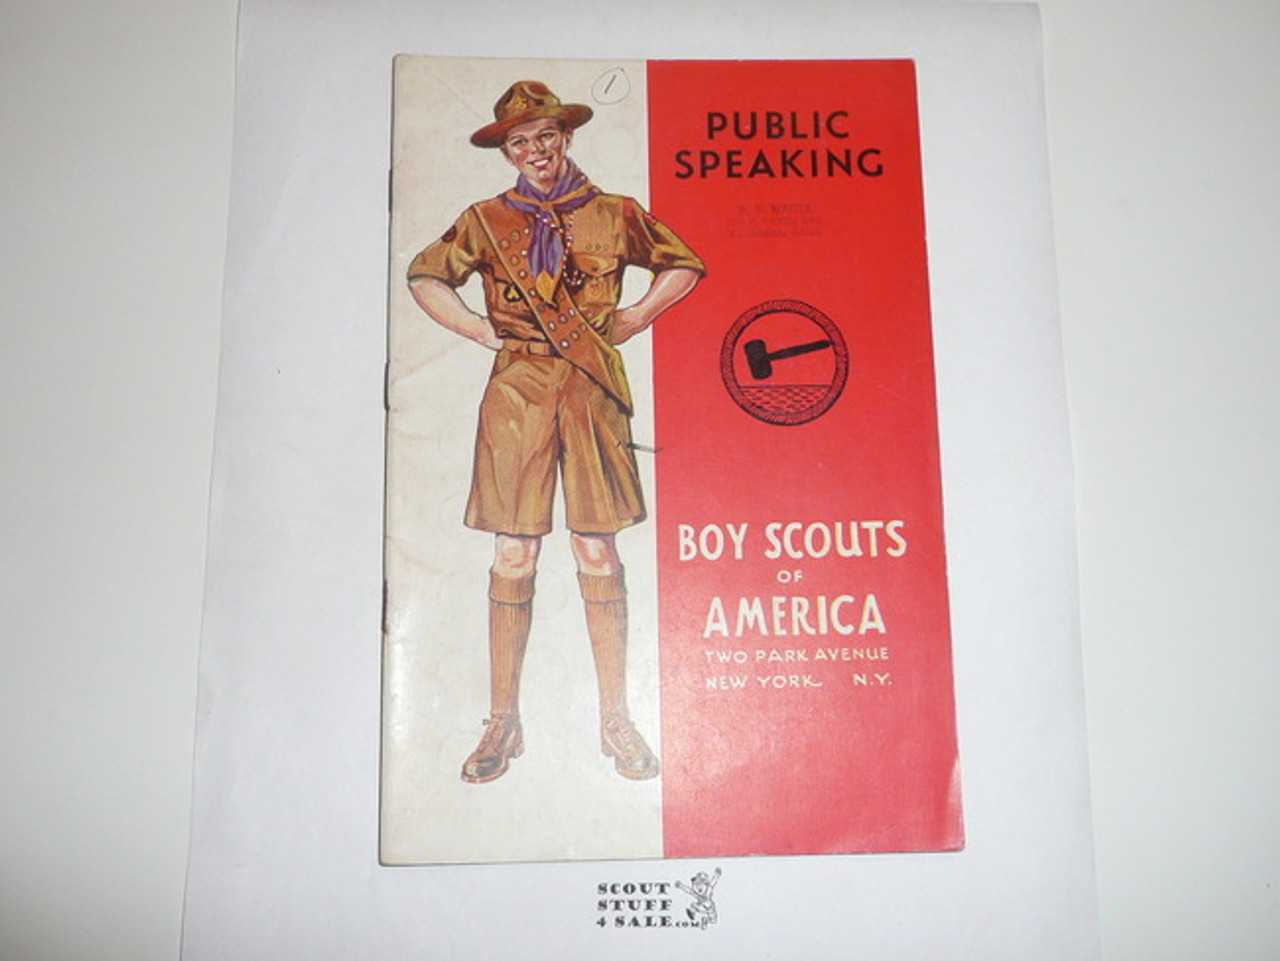 Public Speaking Merit Badge Pamphlet, Type 4, Standing Scout Cover, 5-42 Printing